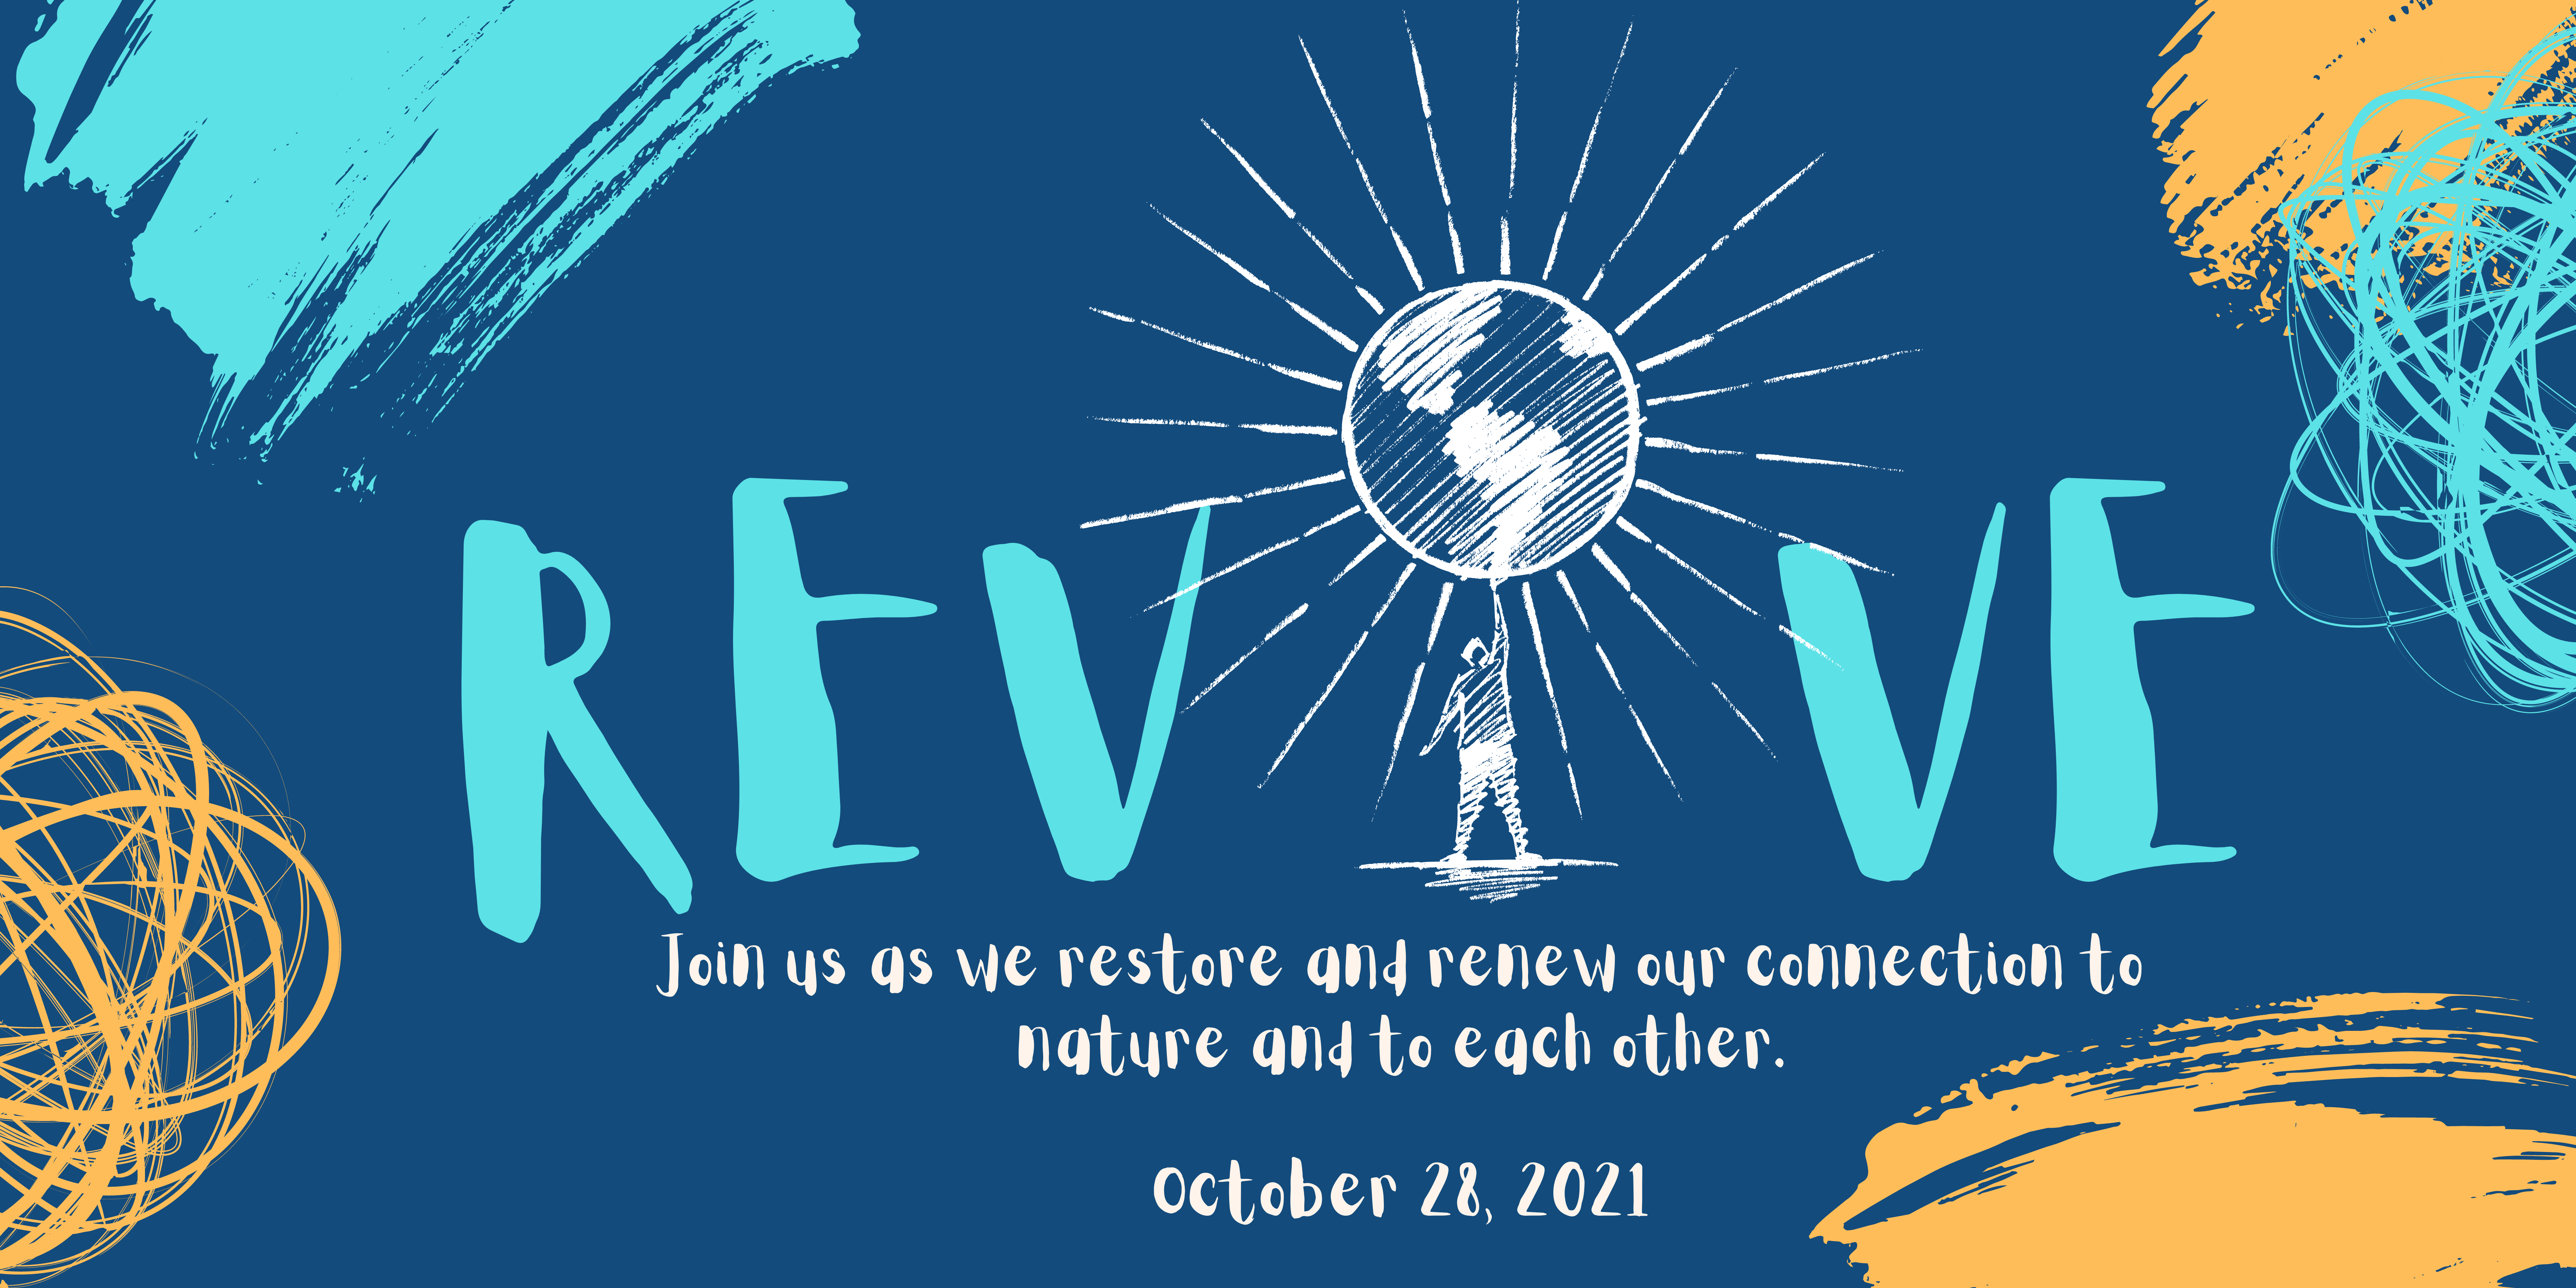 Revive event banner with blue and orange scribbles with the words, Revive, and a sketch of a man touching the earth up above. The banner reads, join us as we restore and renew our connection to nature and to each other. October 28, 2021